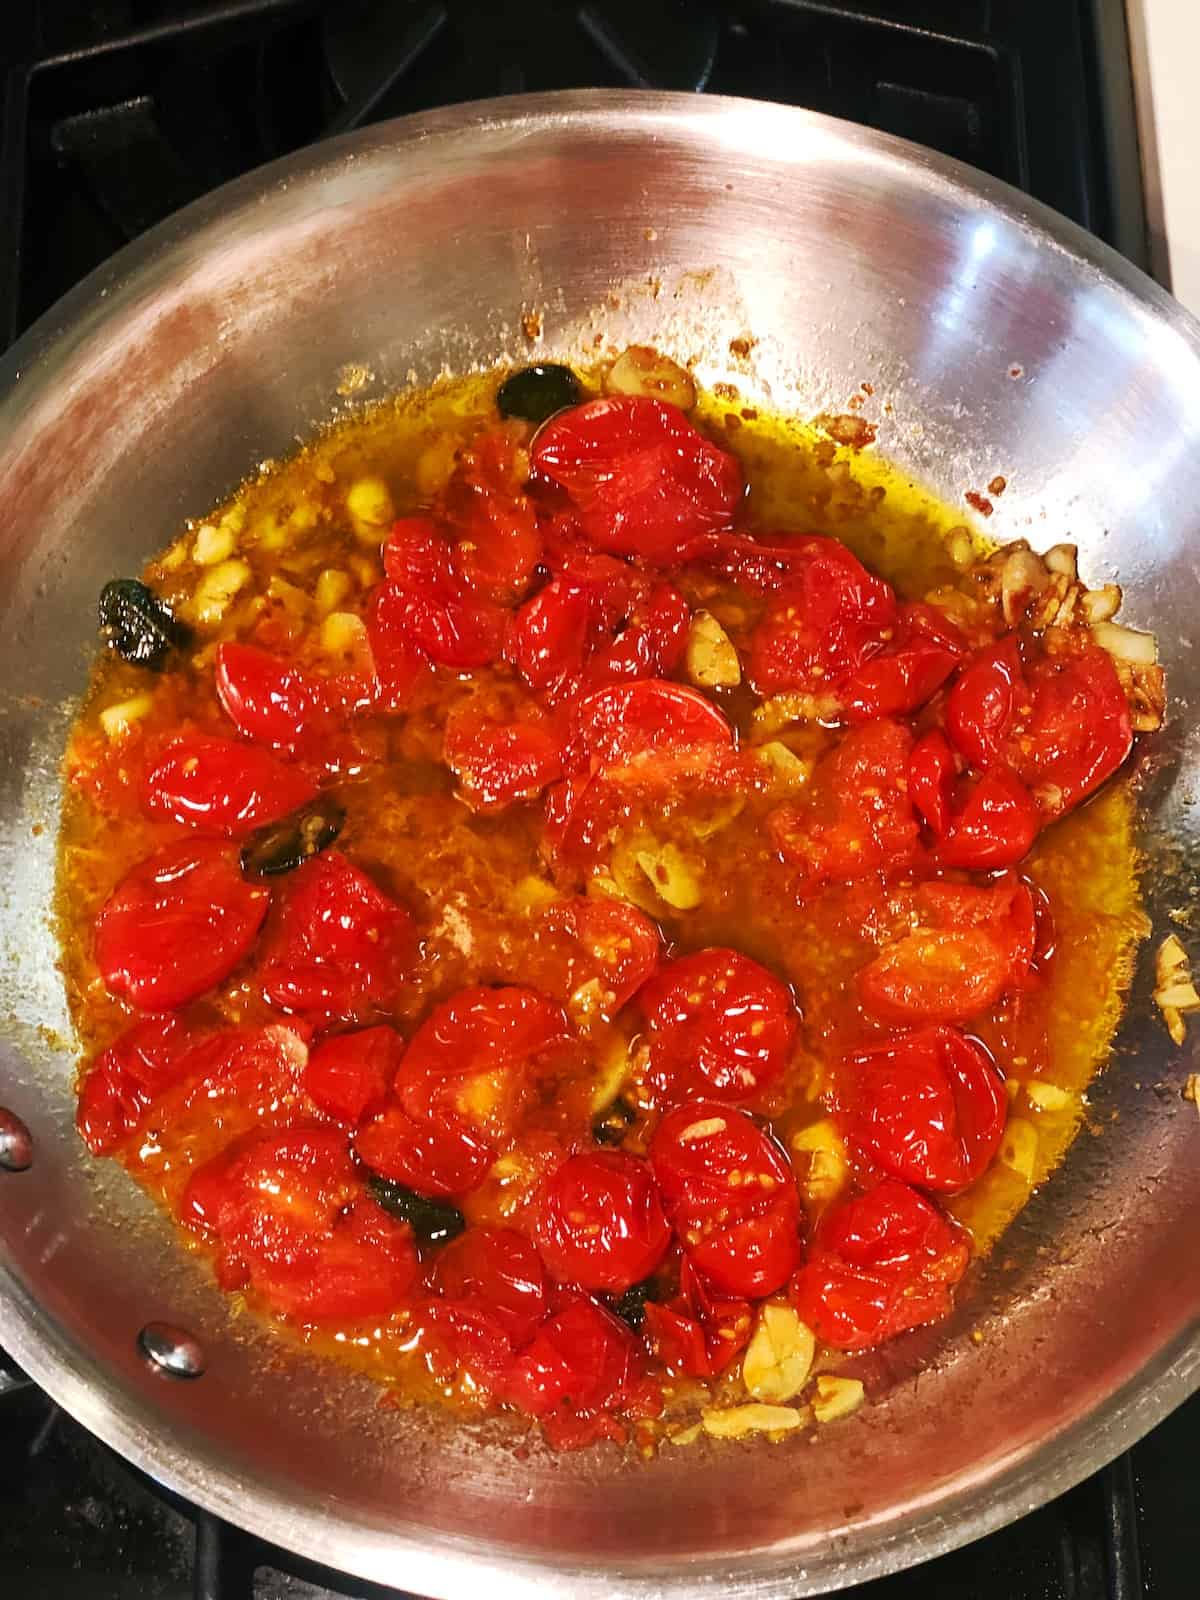 tomatoes cooked down